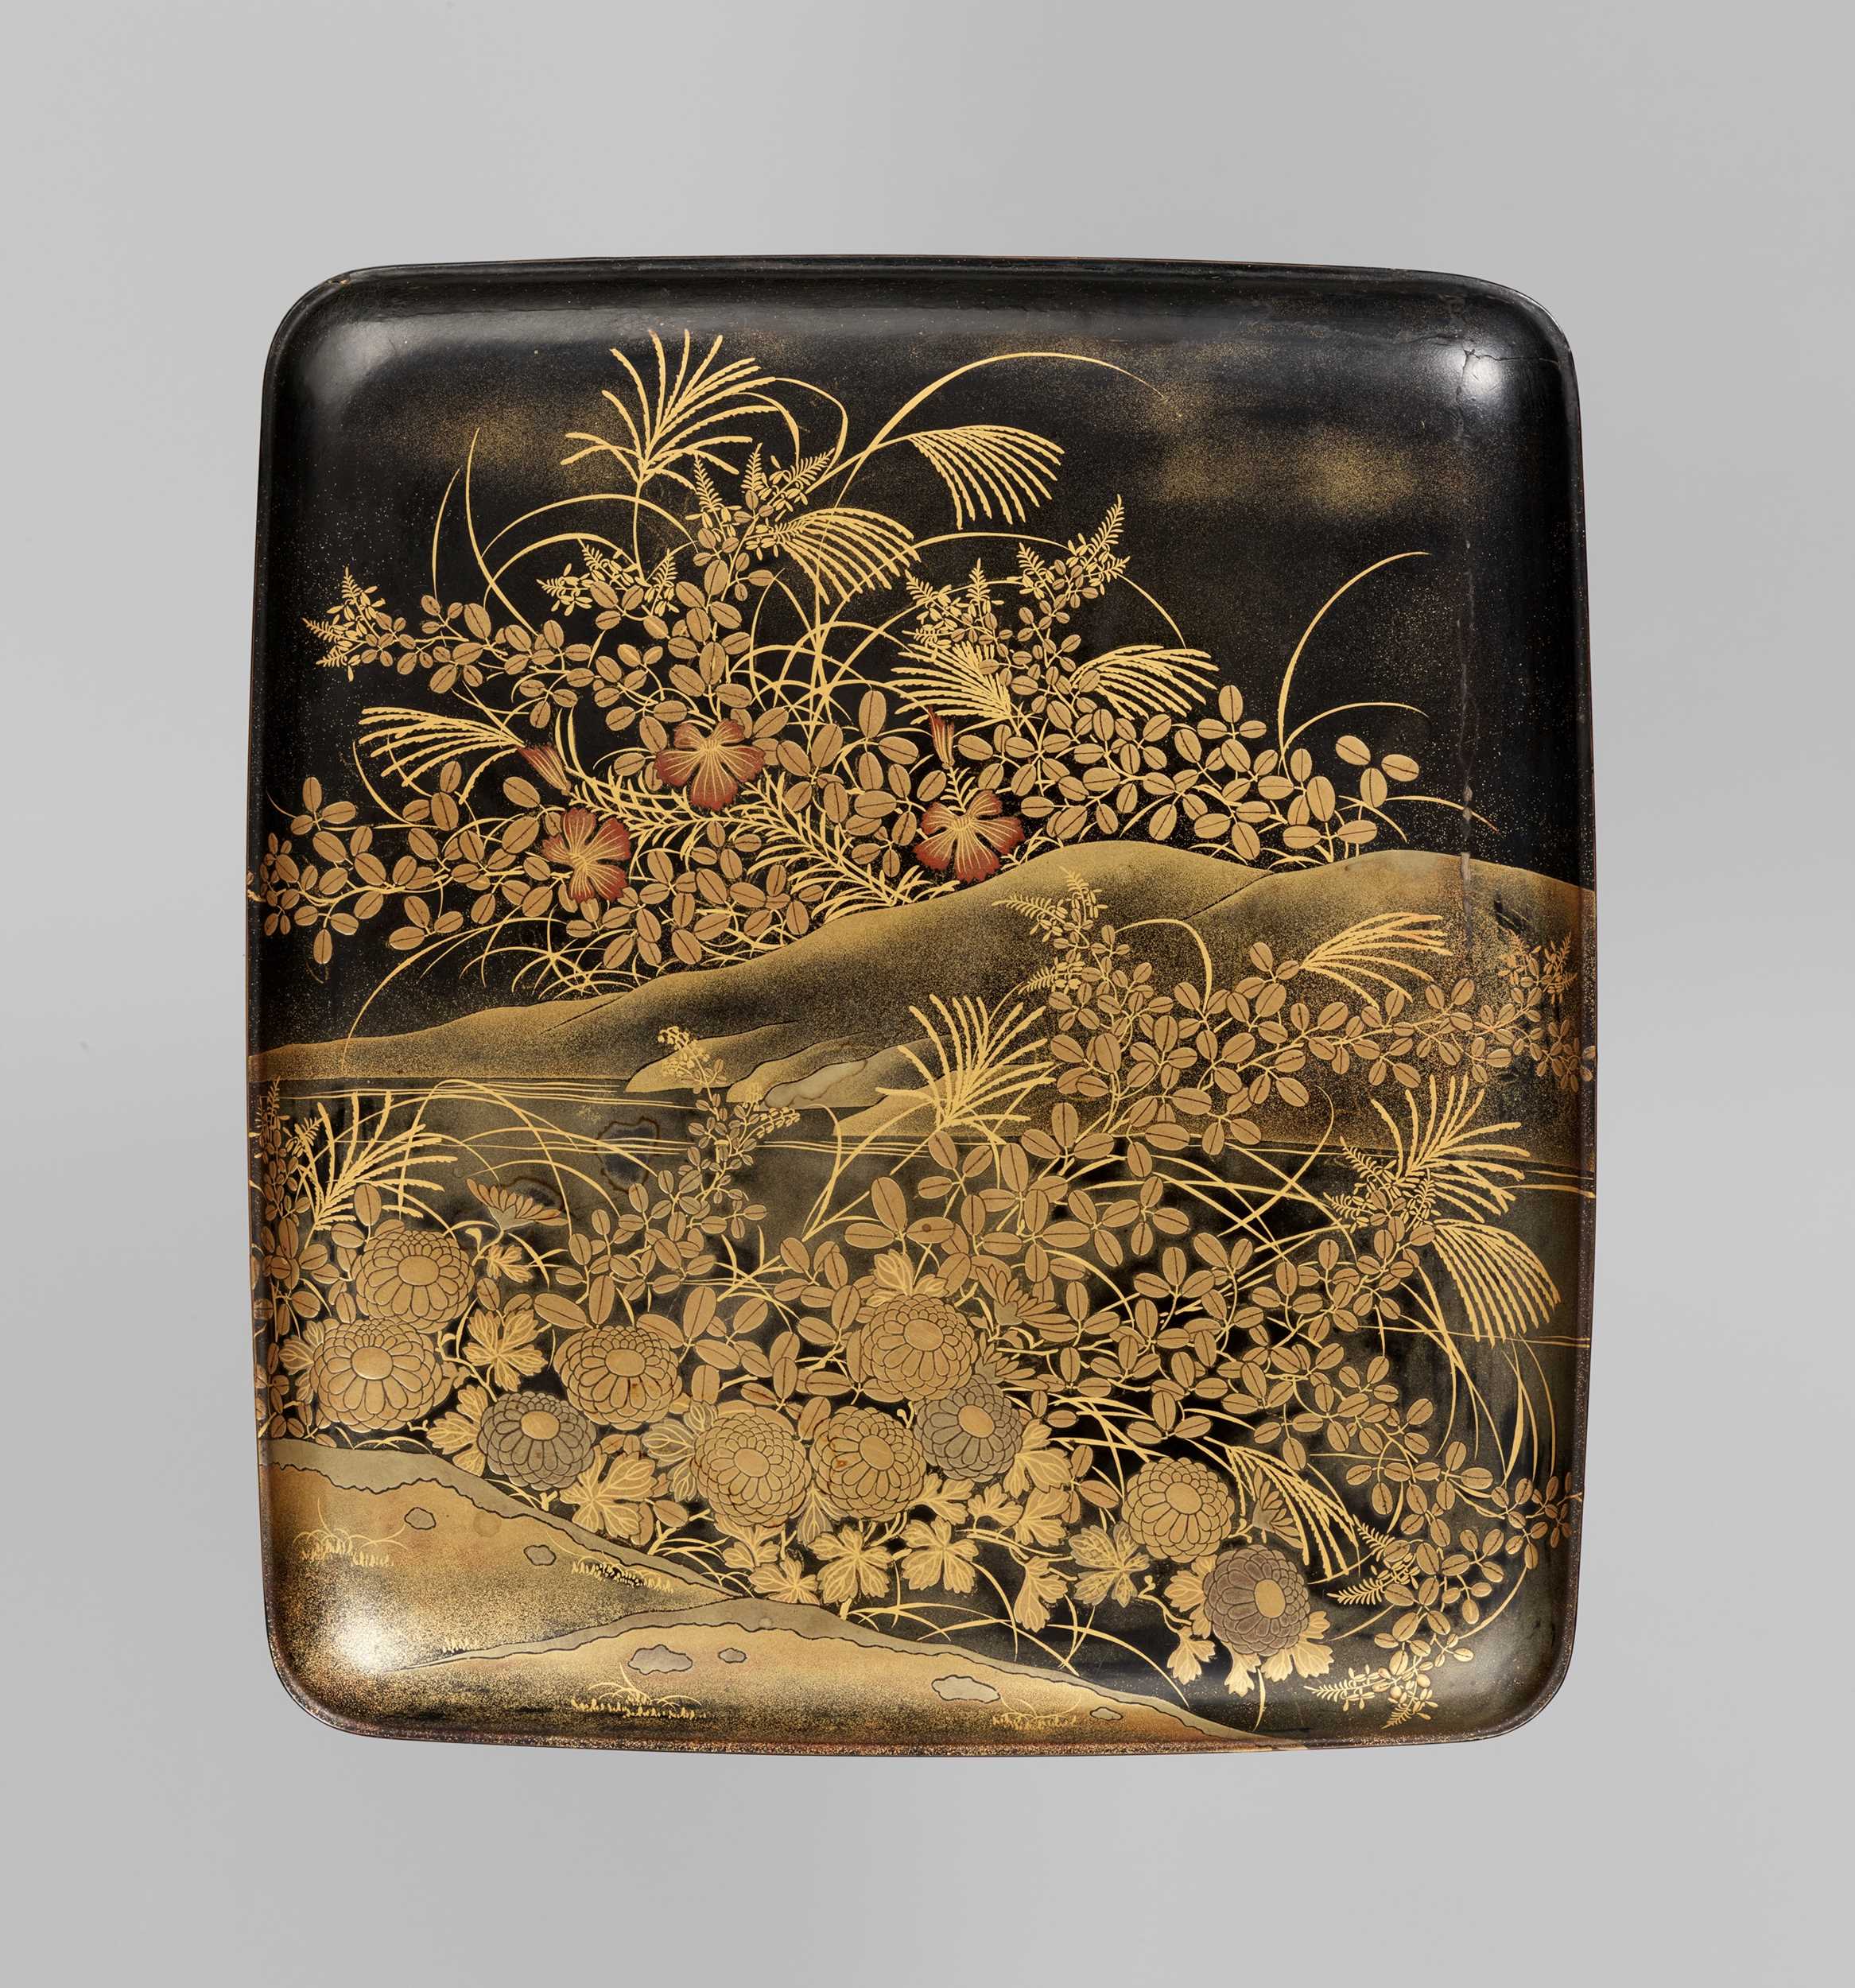 Lot 265 - A BLACK AND GOLD LACQUER SUZURIBAKO WITH CHRYSANTHEMUM AND DUCKS